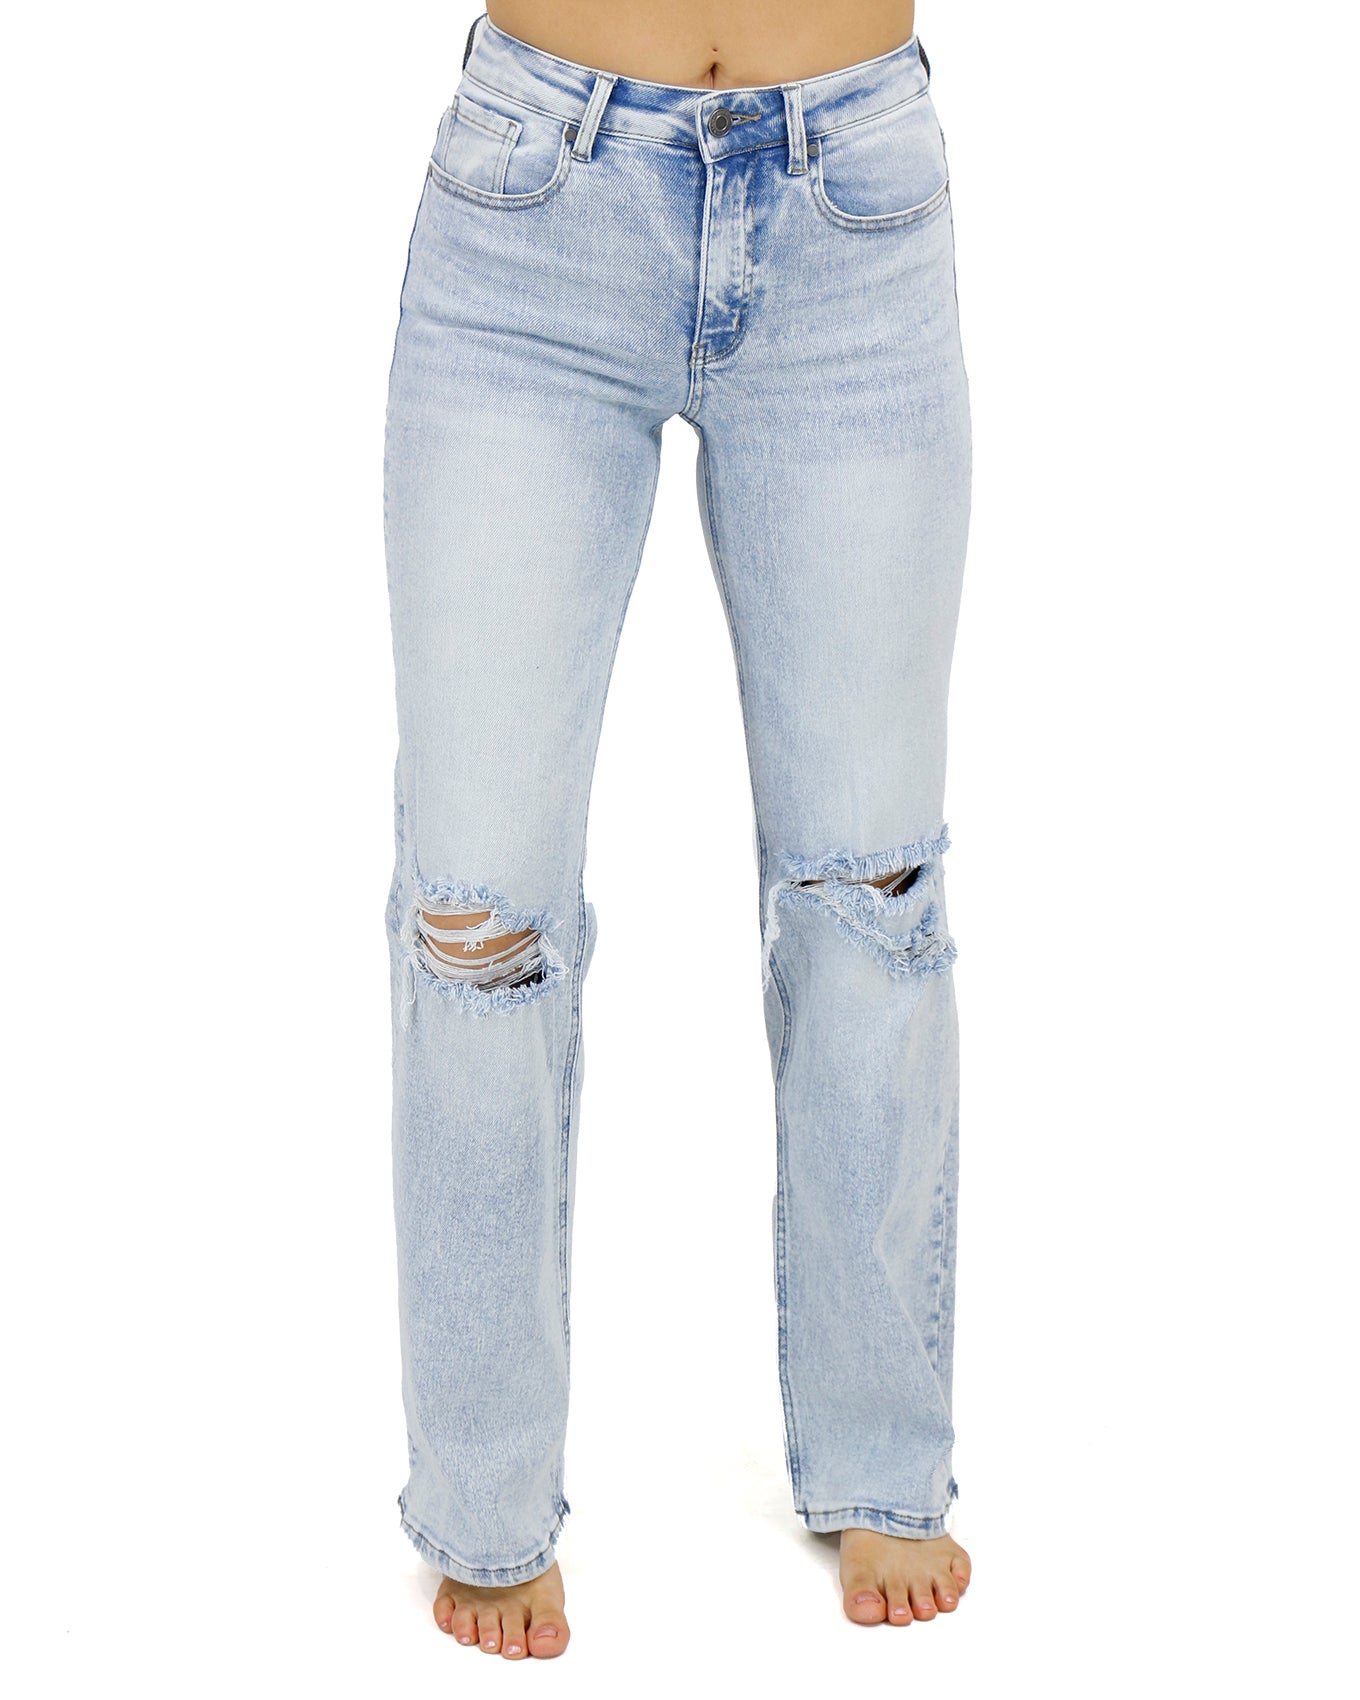 Distressed Denim Pants for Women's High Waist Wide Leg Ankle Jeans